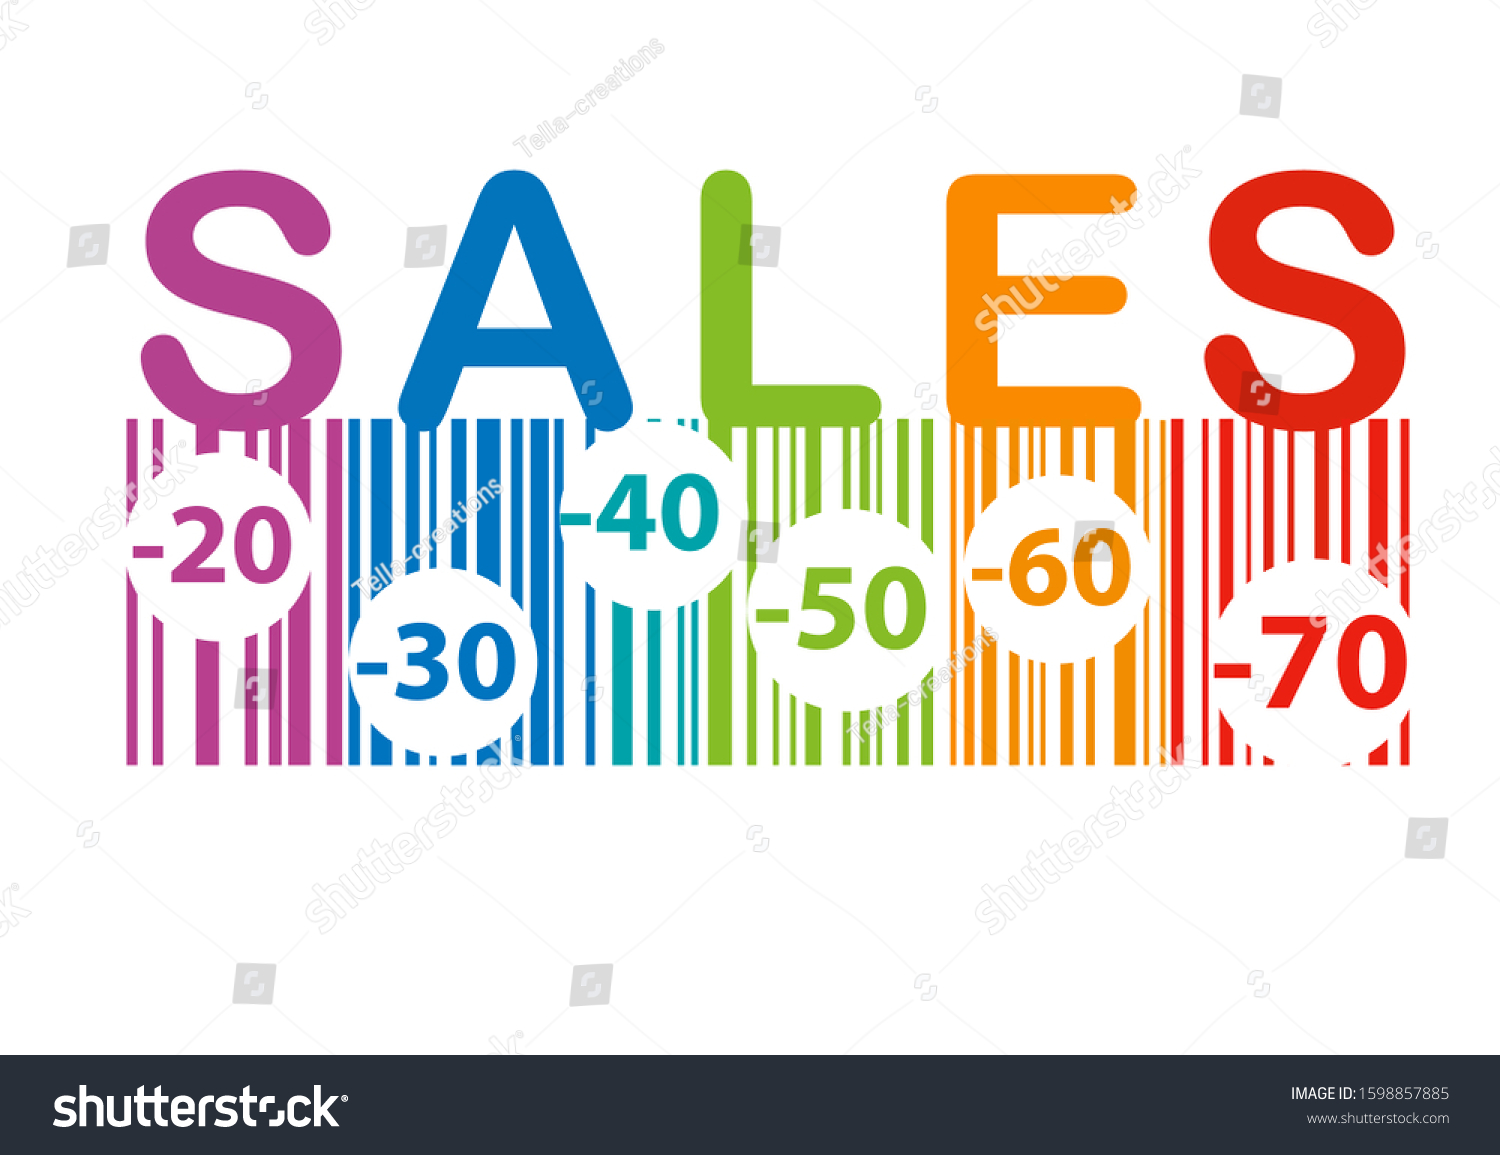  sale banner with colorful texts background, creative design for banner, flyer, vector illustration #1598857885